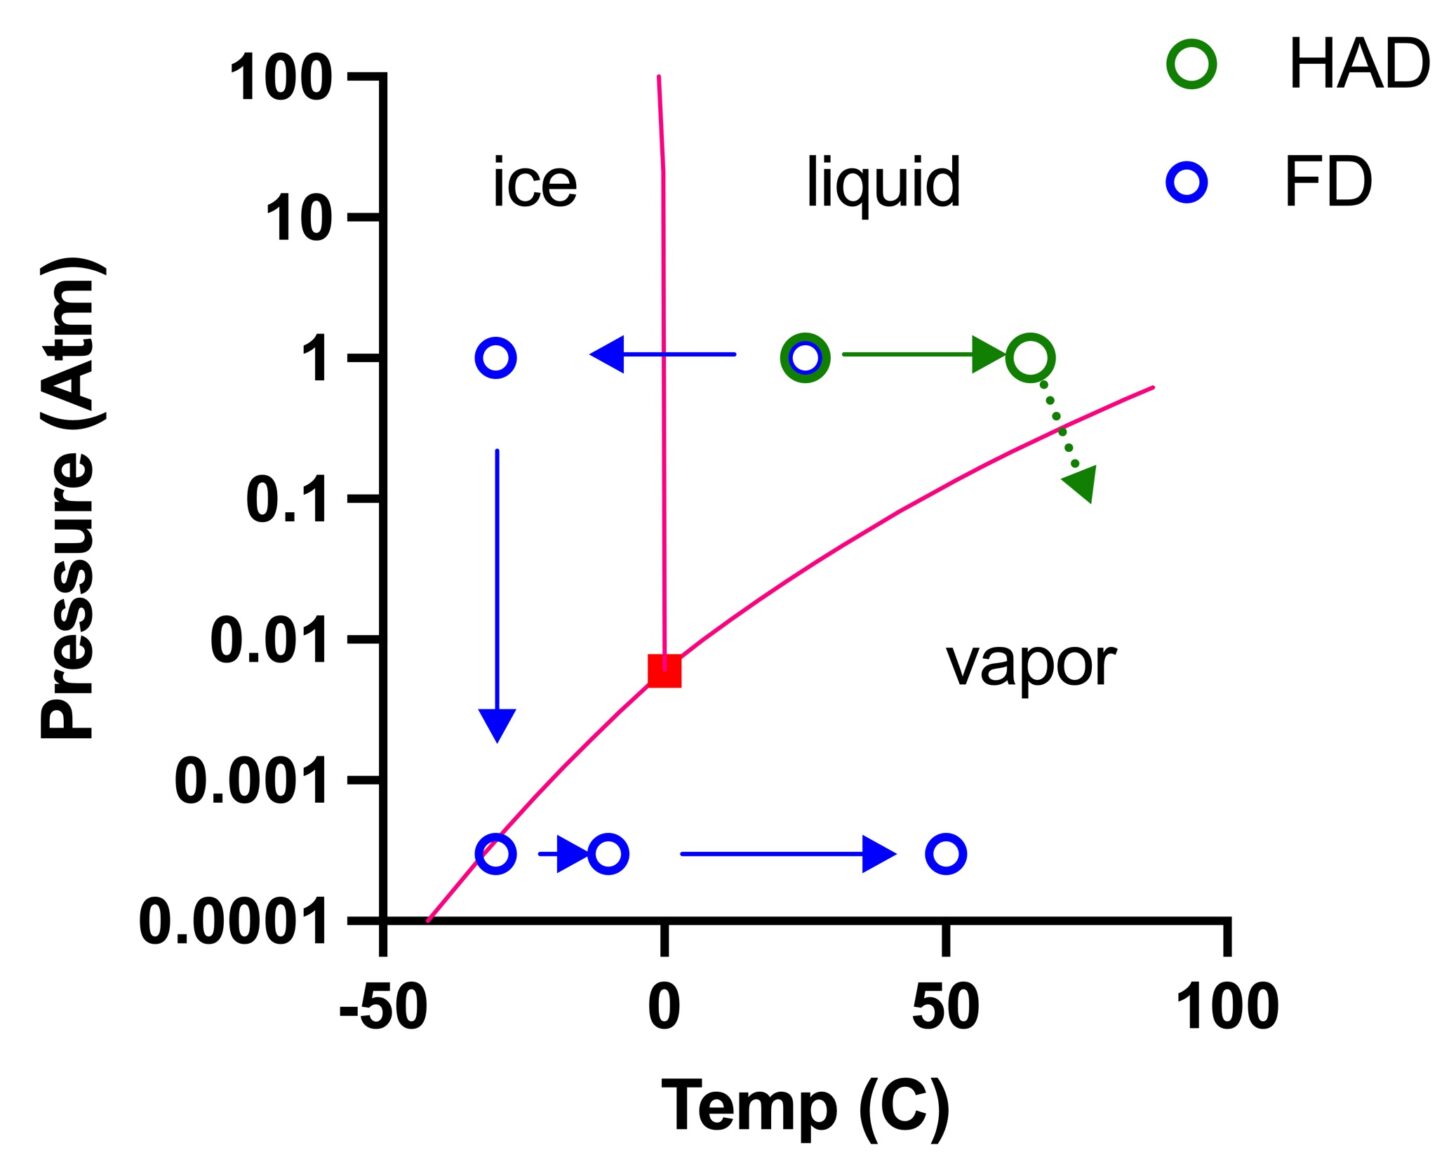 plot showing water states at different temperatures and pressures for both heat-assisted dehydration and freeze-drying